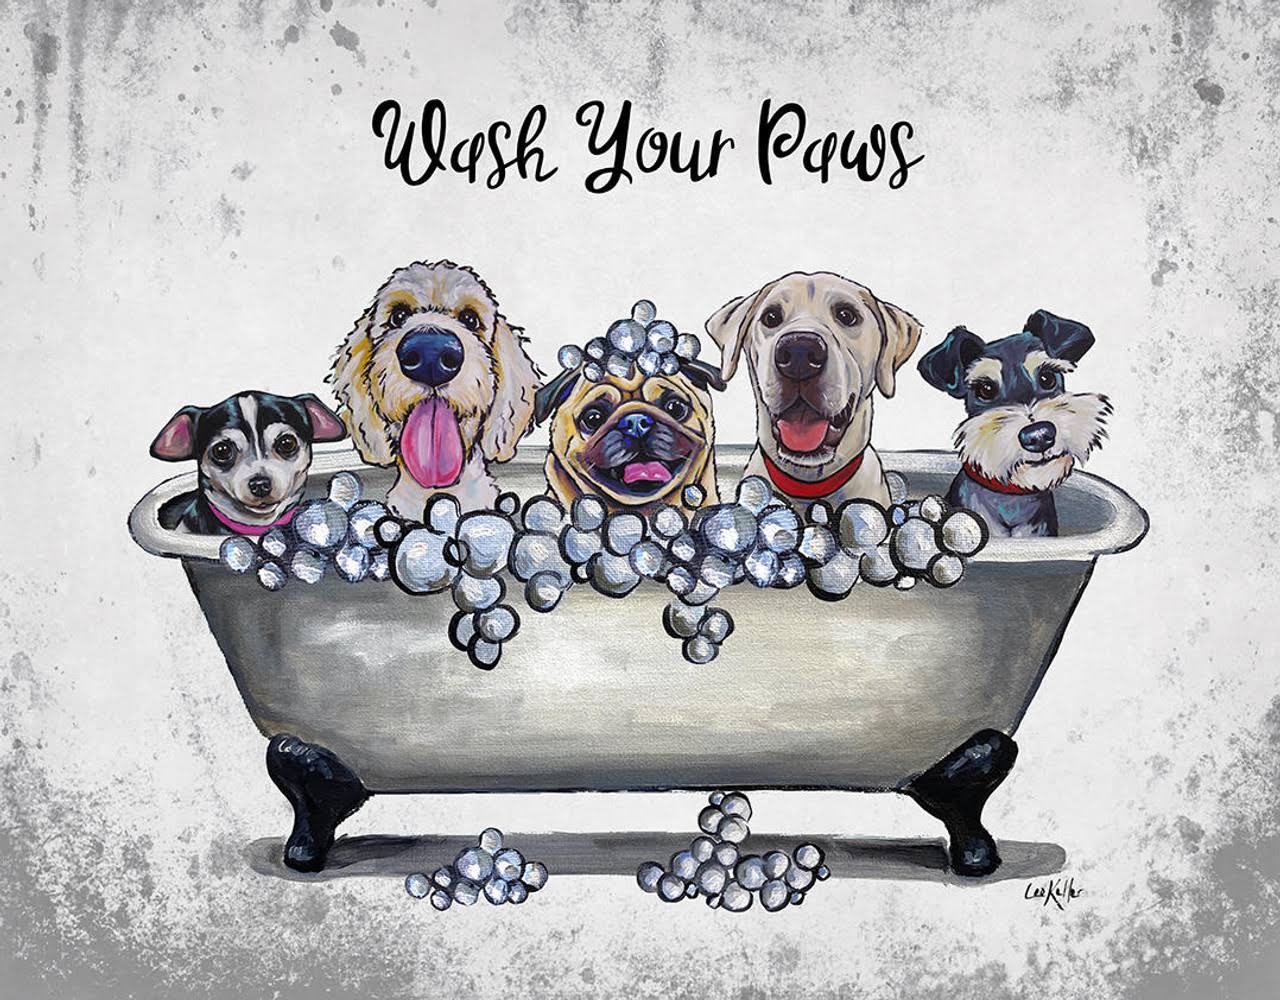 12-1/2 x 16-inch Wash Your Paws Tin Sign